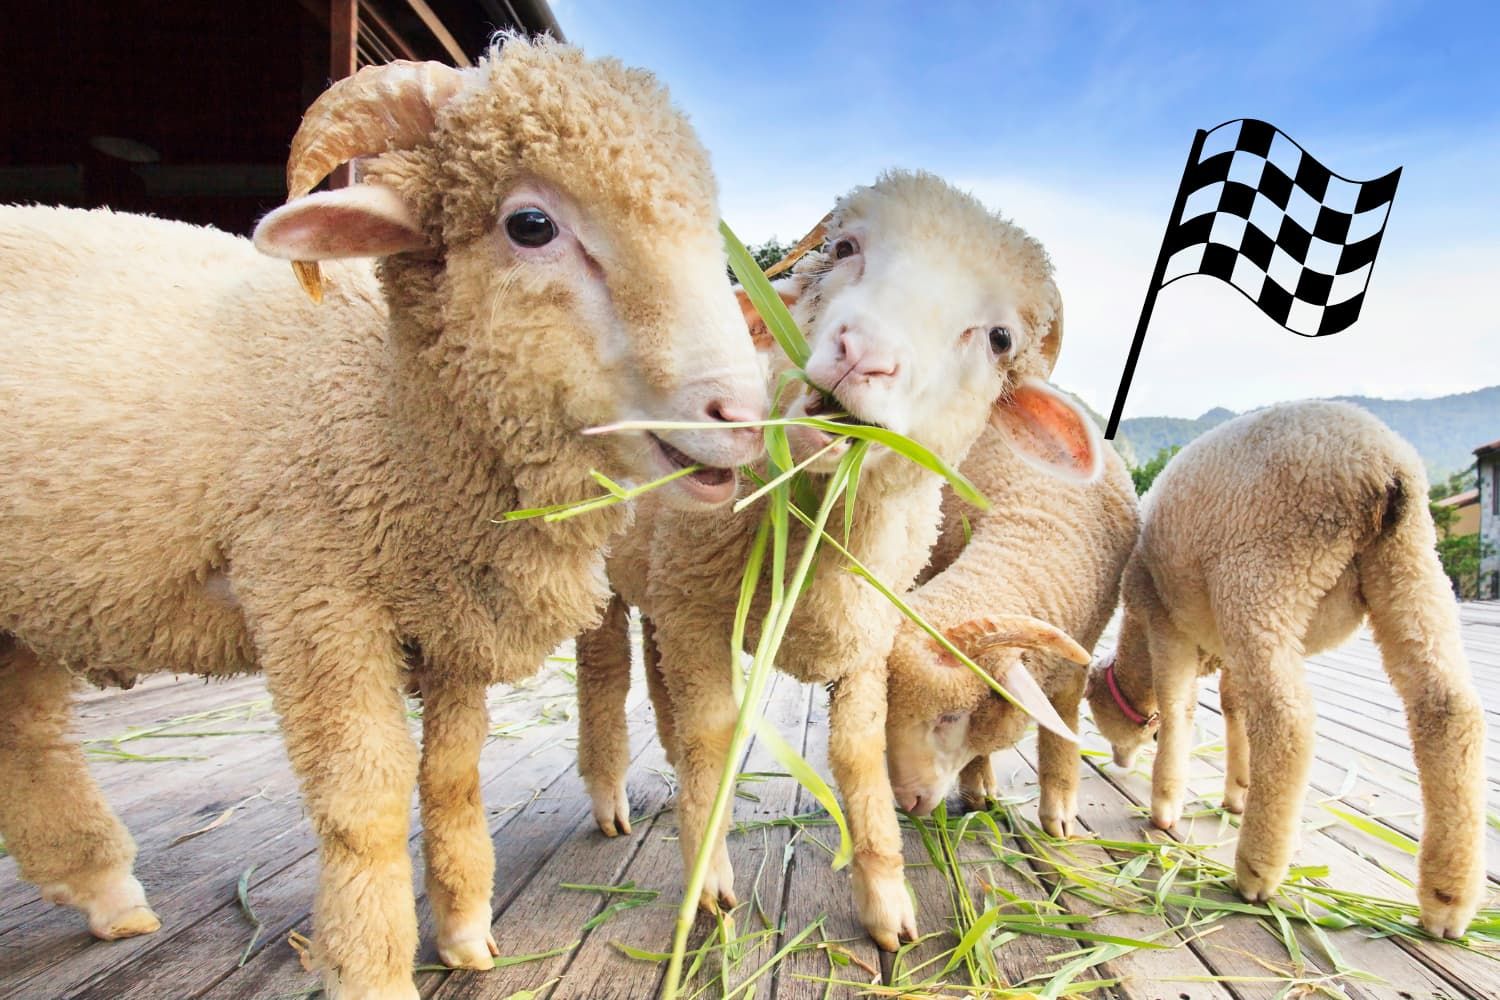 Game%20-%20OT%20Psalm%2023%20-%20The%20feed%20the%20sheep%20relay%20race-6bb58723 God's guidance